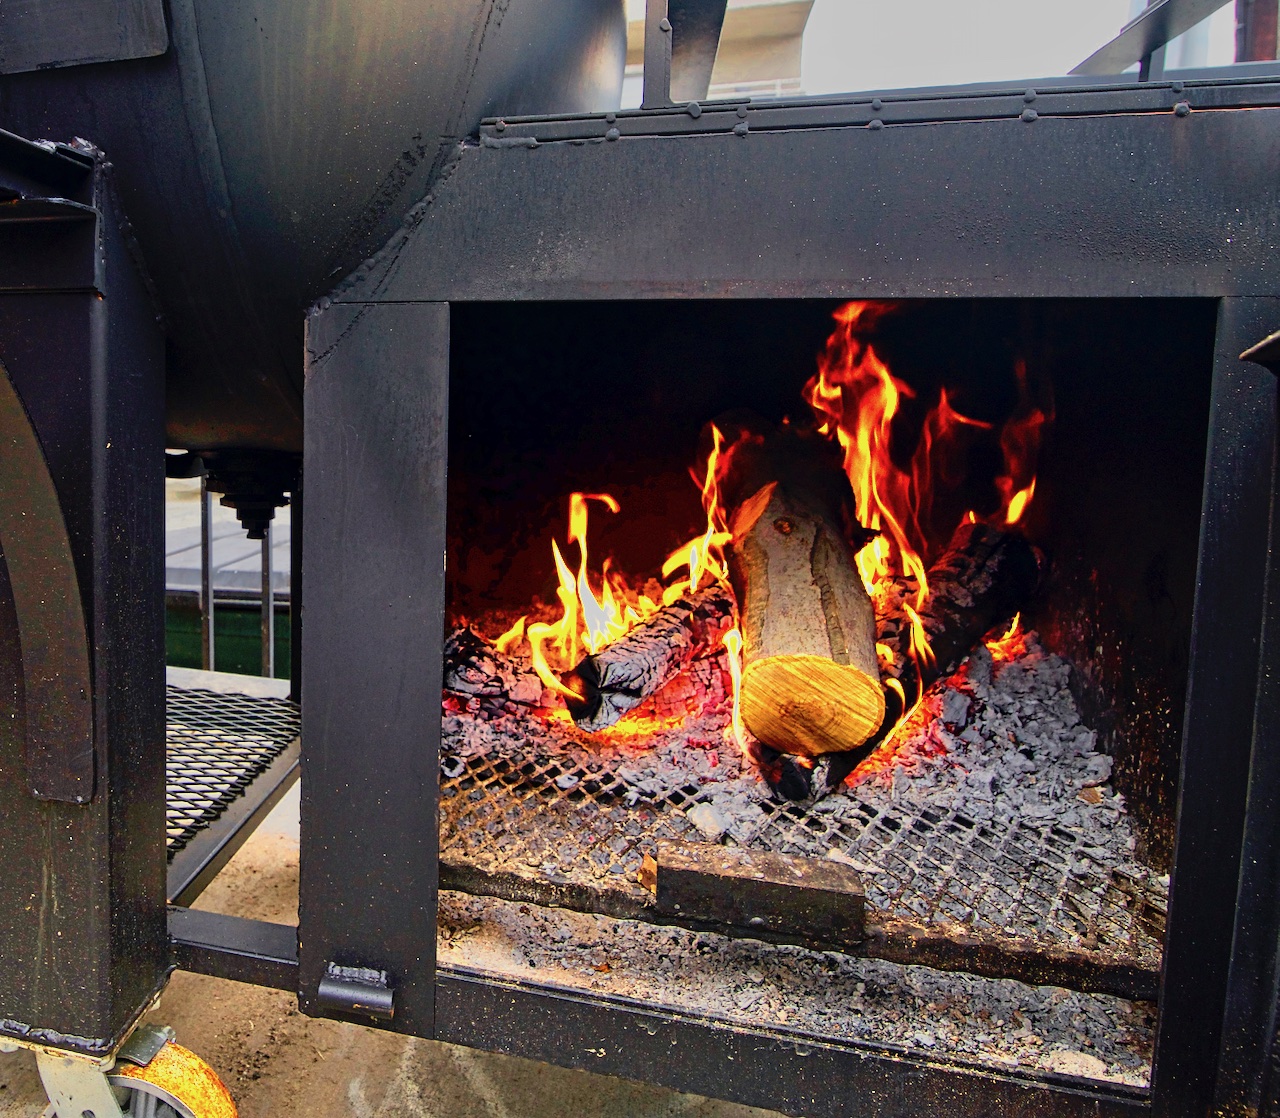 Their smoker uses Apple wood for the best flavor. Photo by Patrick Robinson